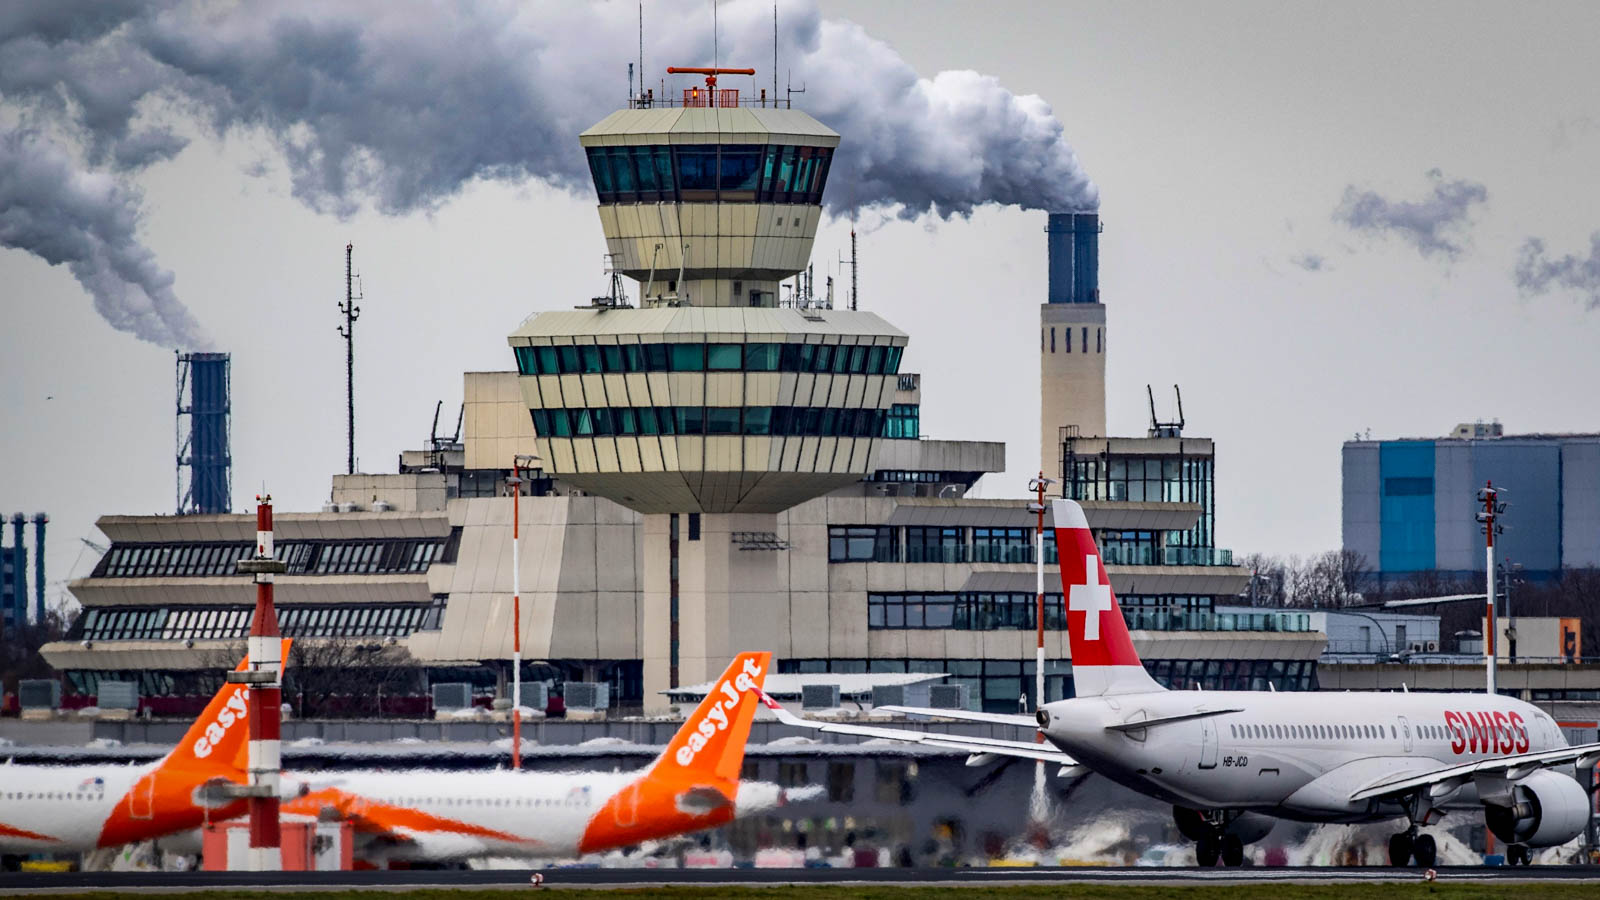 Berlin Tegel Farewell To The Airport That Wouldn T Die Cnn Travel